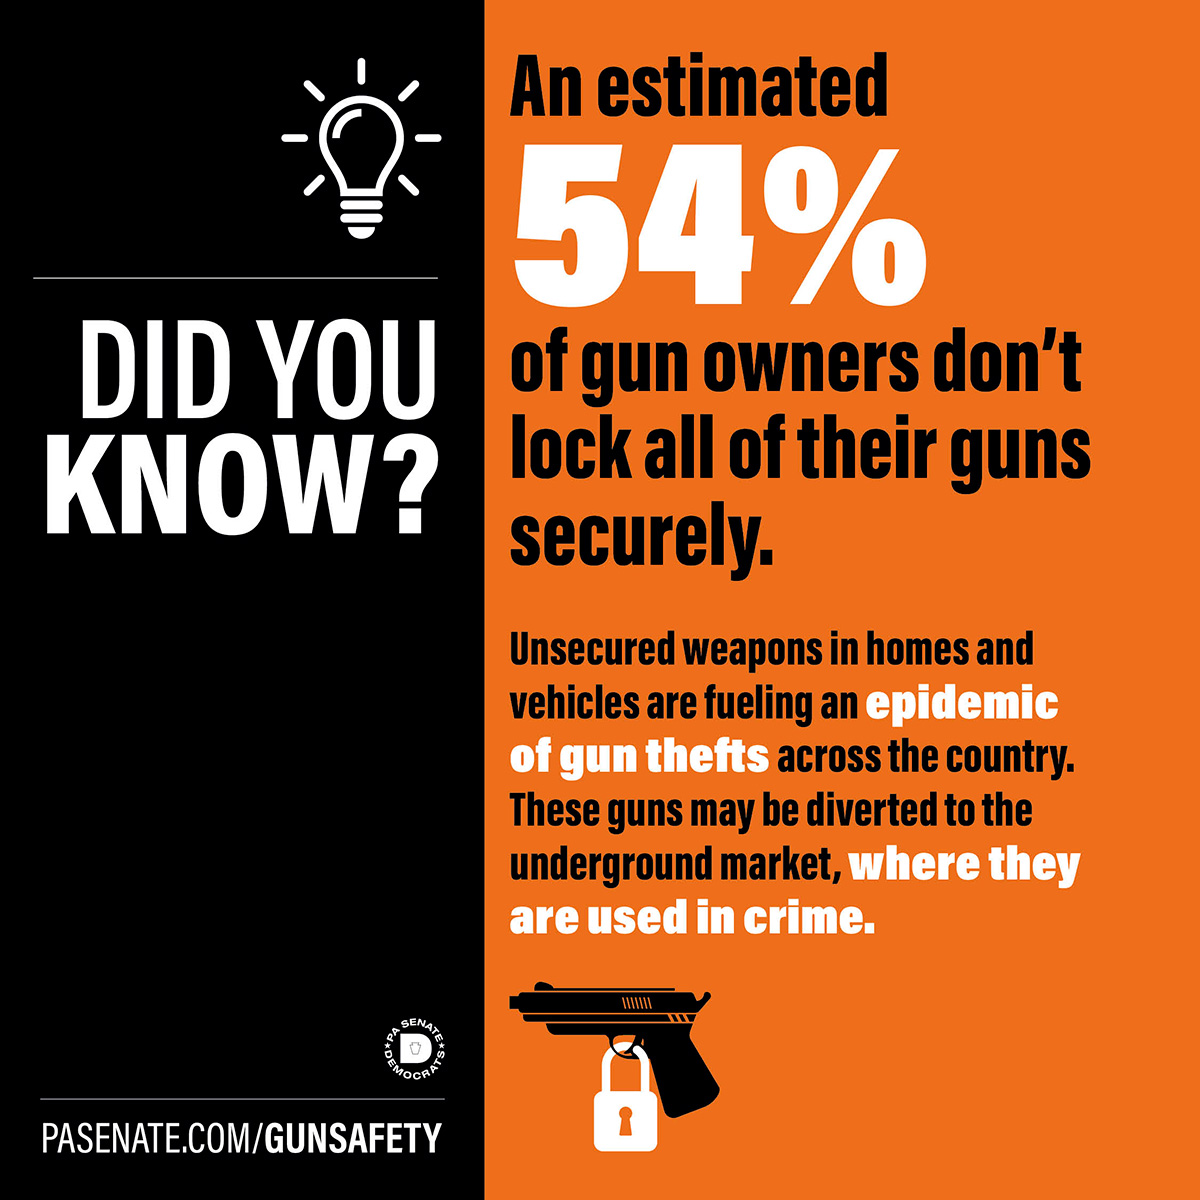 Did you know? An estimated 54% of gun owners don't lock all of their guns.